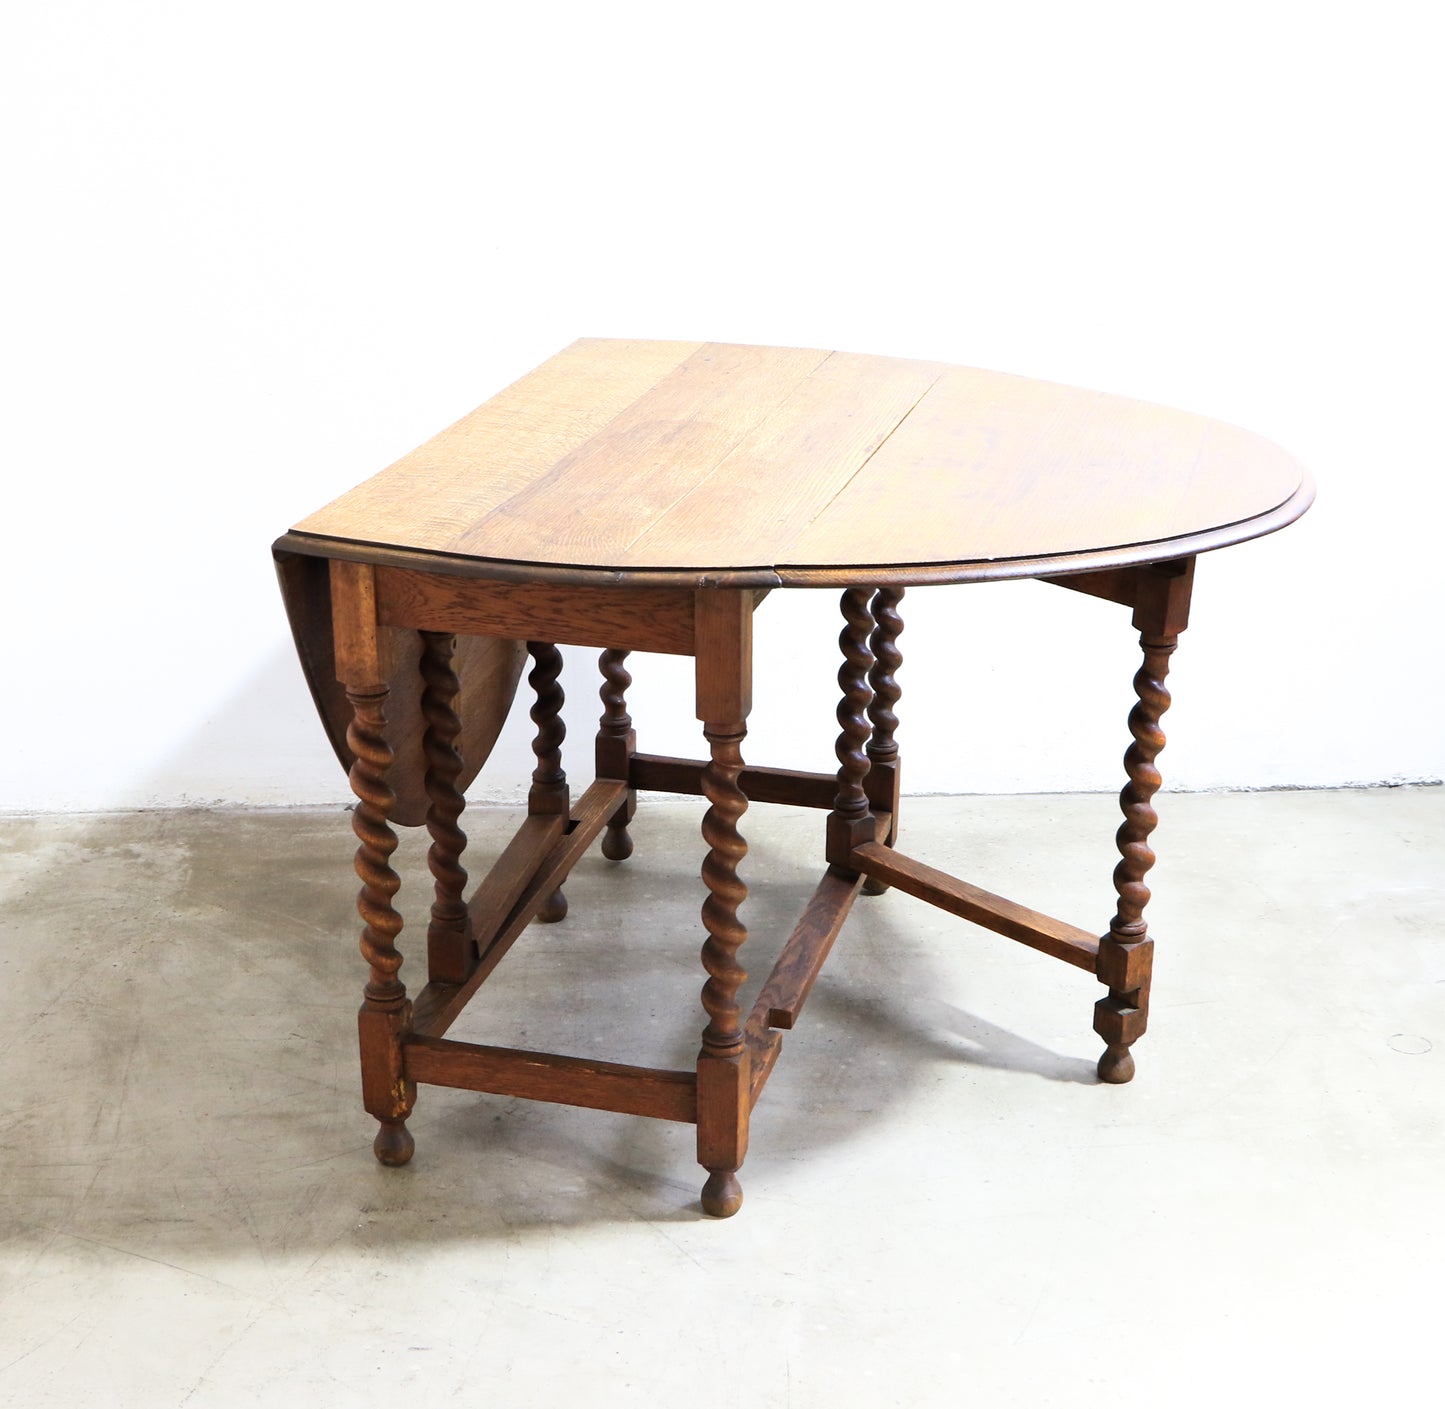 Baroque Twist Leg Extendable Dining Table